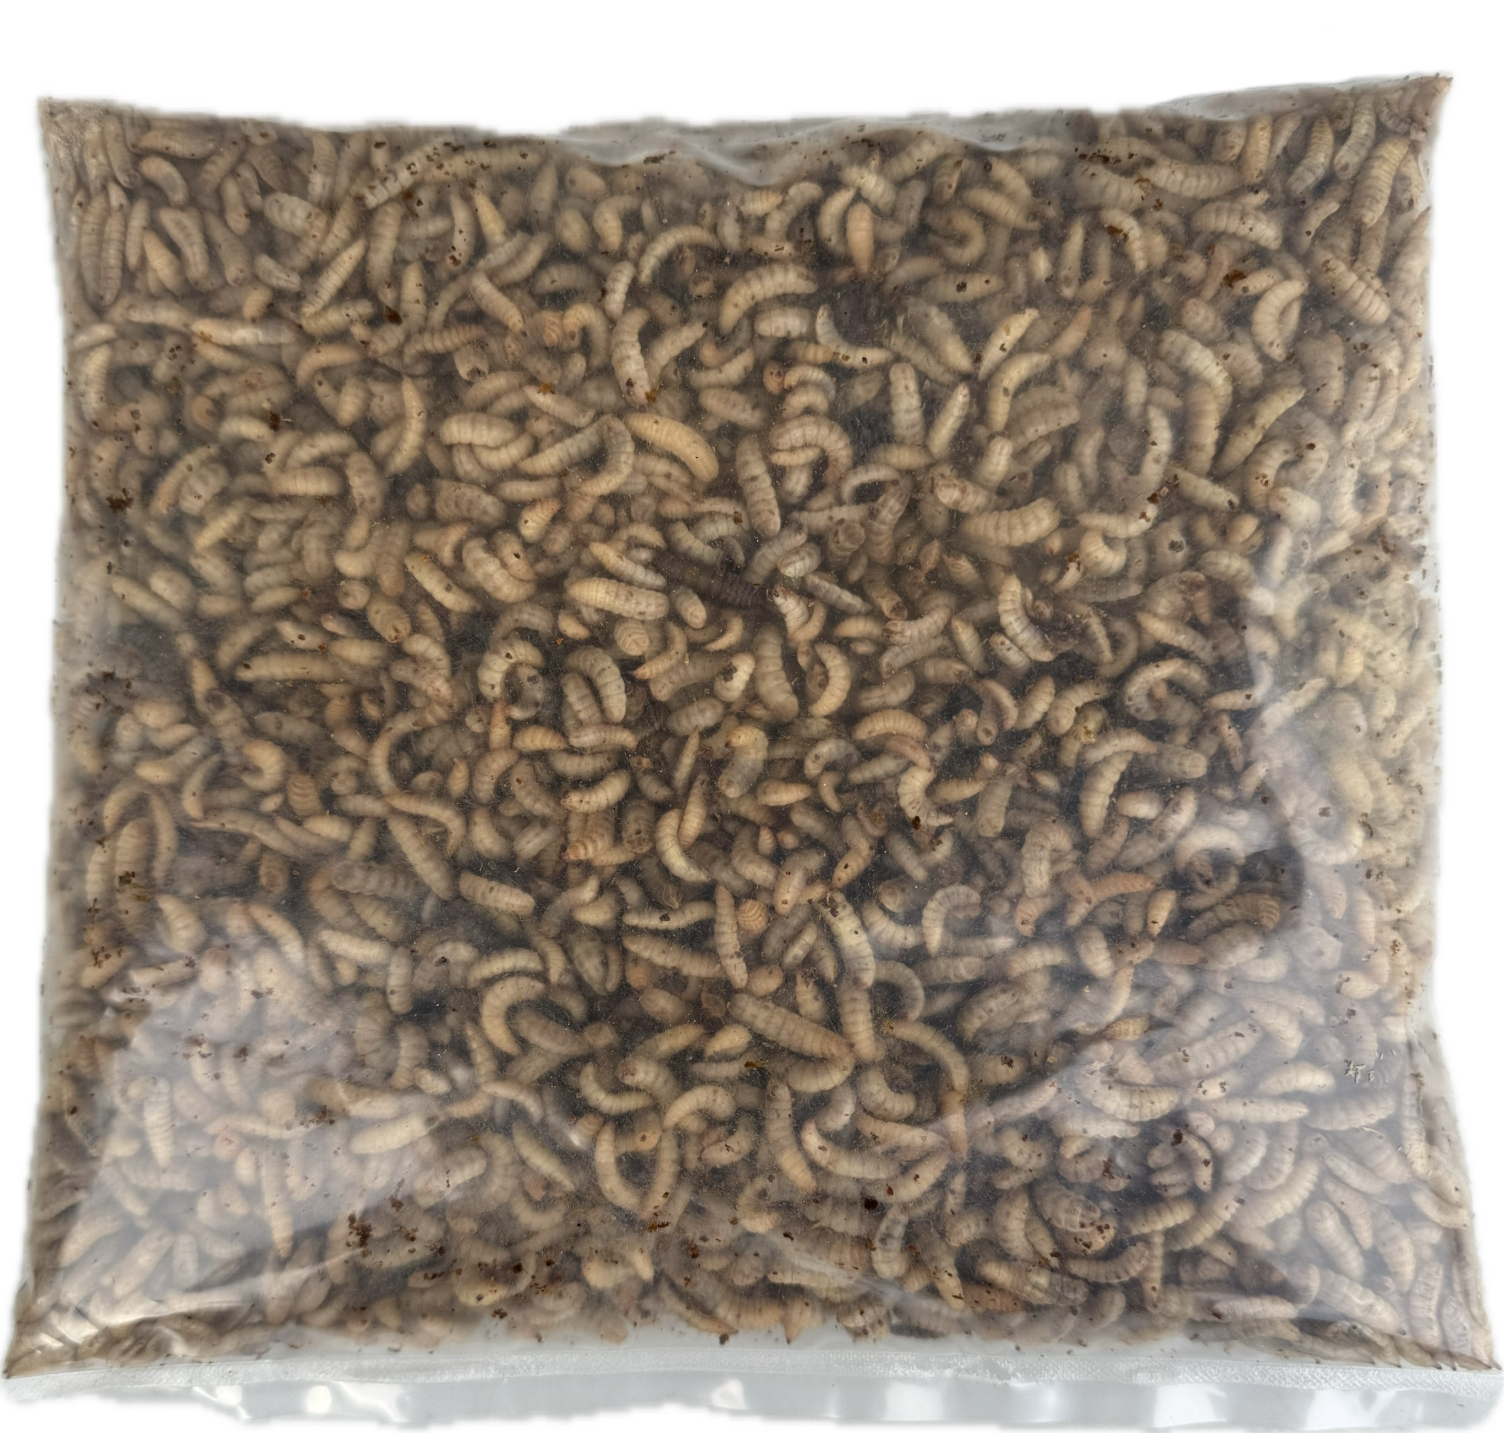 Live Calci Worms Fishing Bait 1 pint of live BSF Maggots